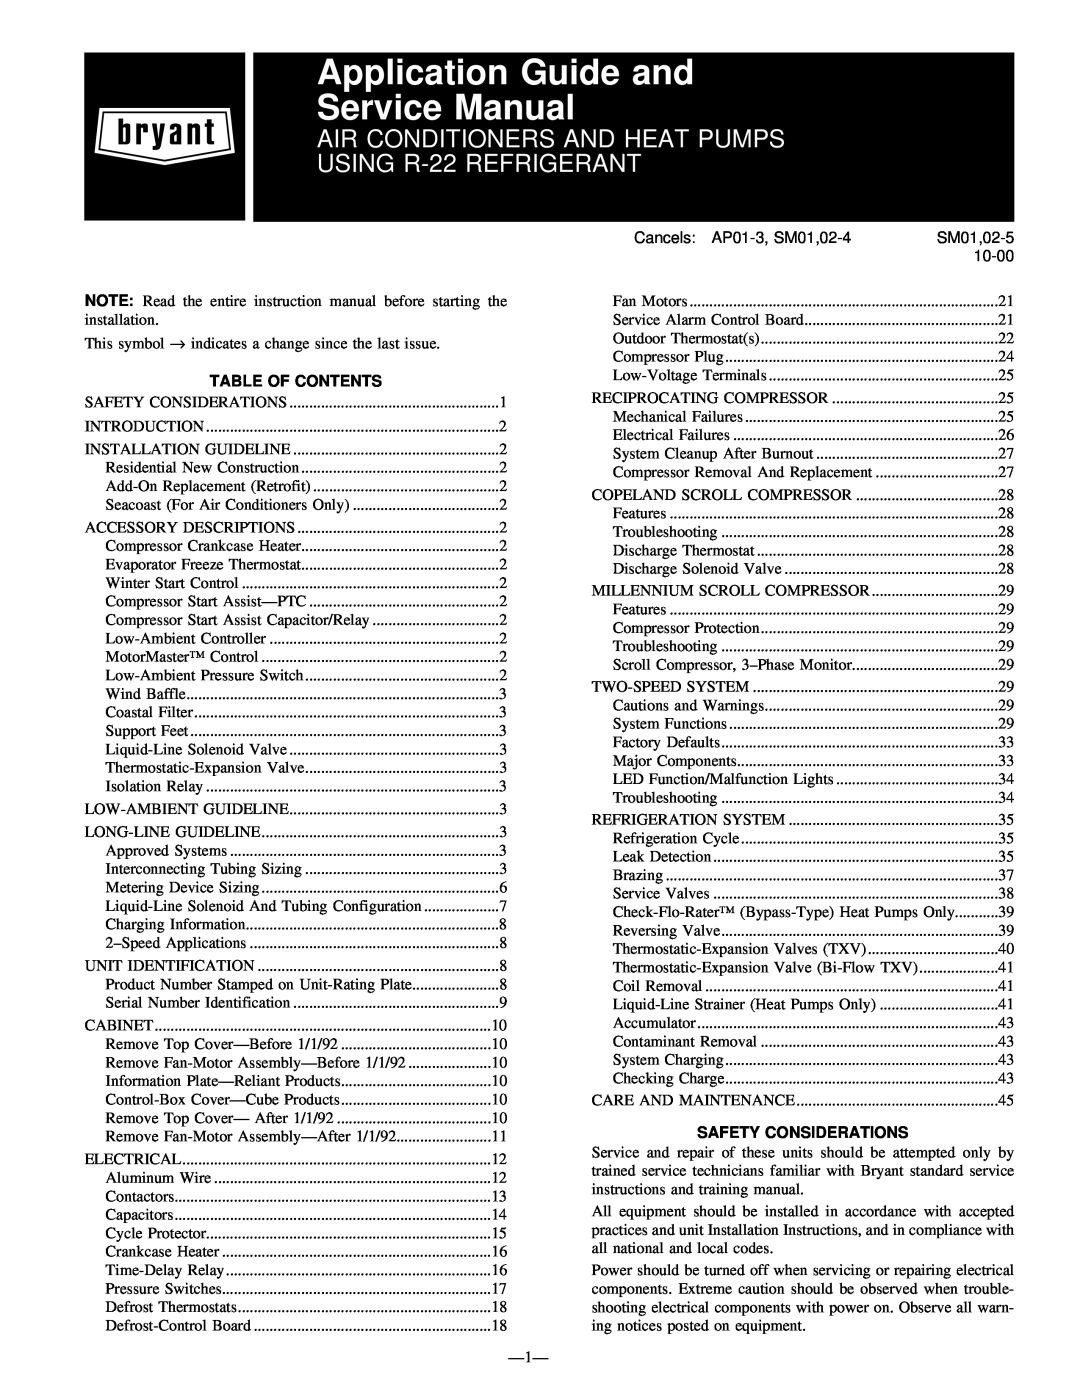 Bryant R-22 service manual Table Of Contents, Safety Considerations, Application Guide and Service Manual 